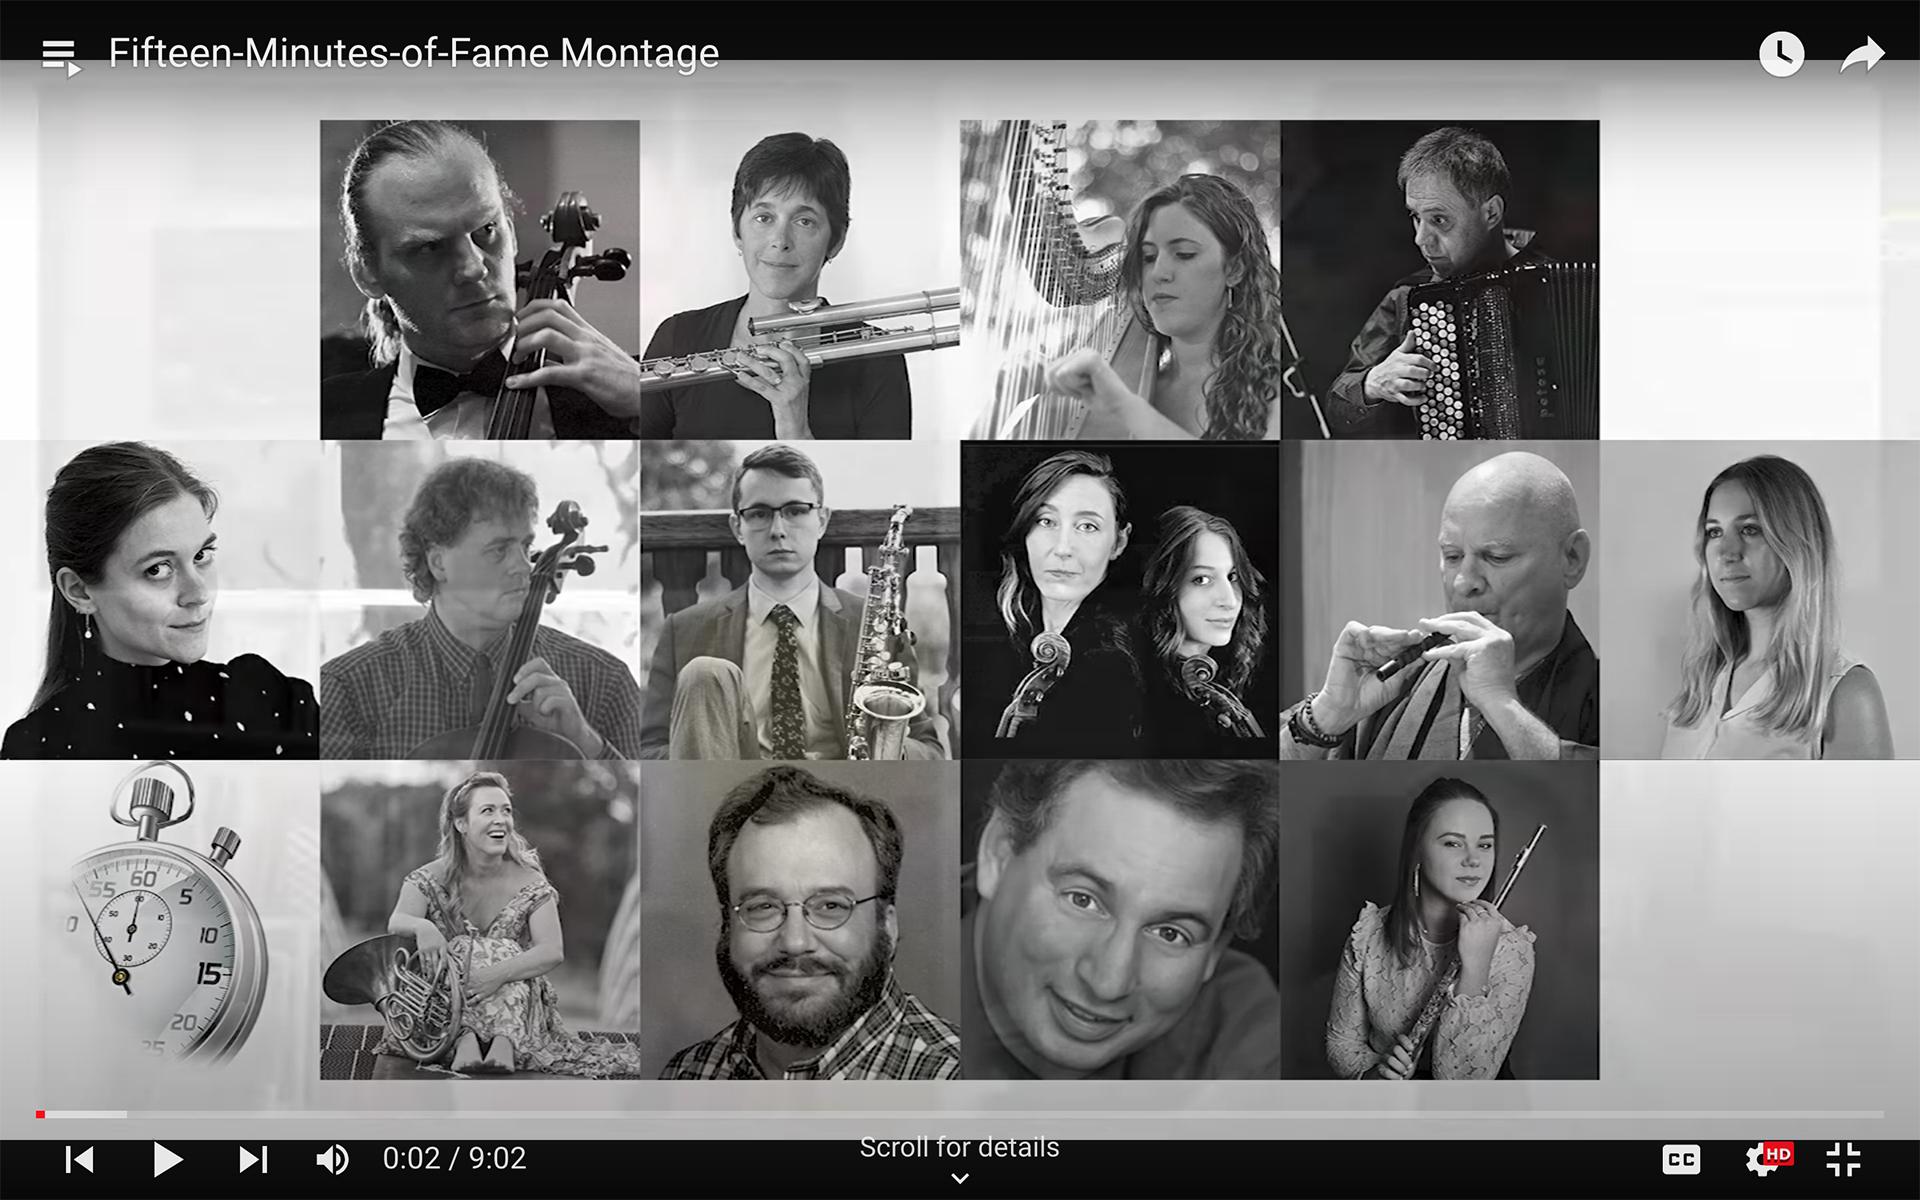 Fifteen-Minutes-of-Fame Montage